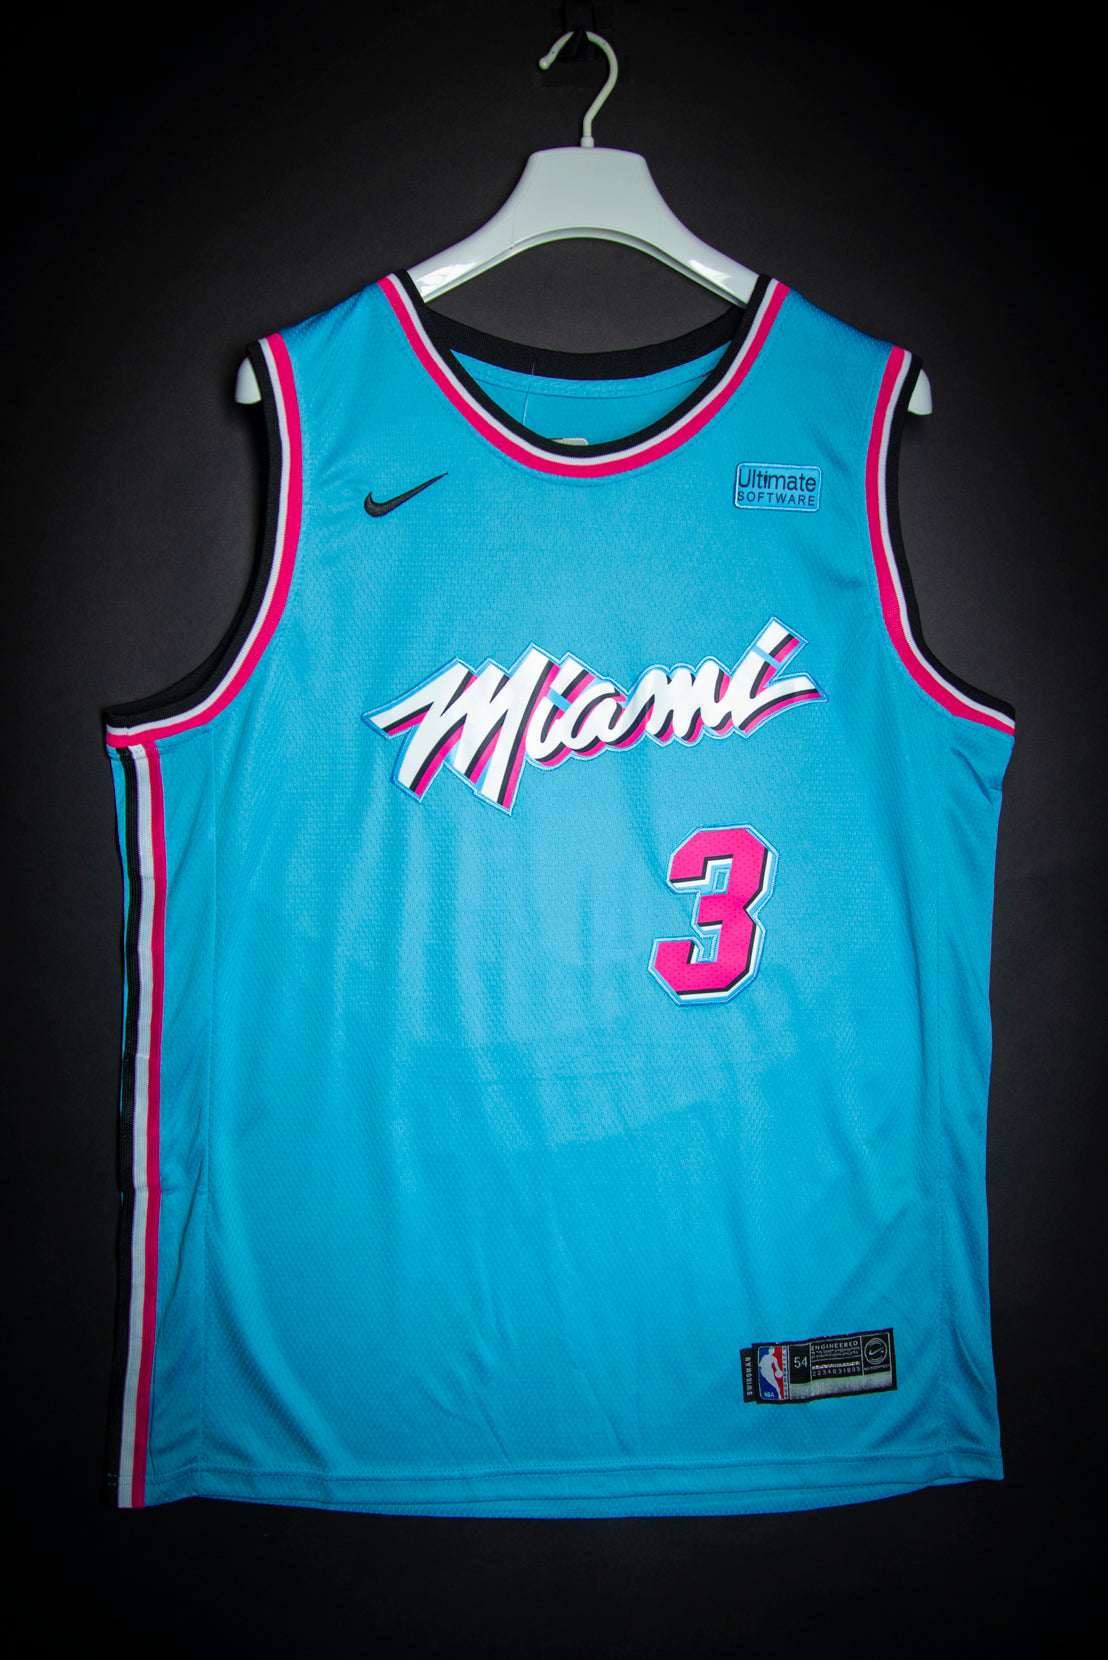 Newest Miami Heat Vice Jersey again the best in Association